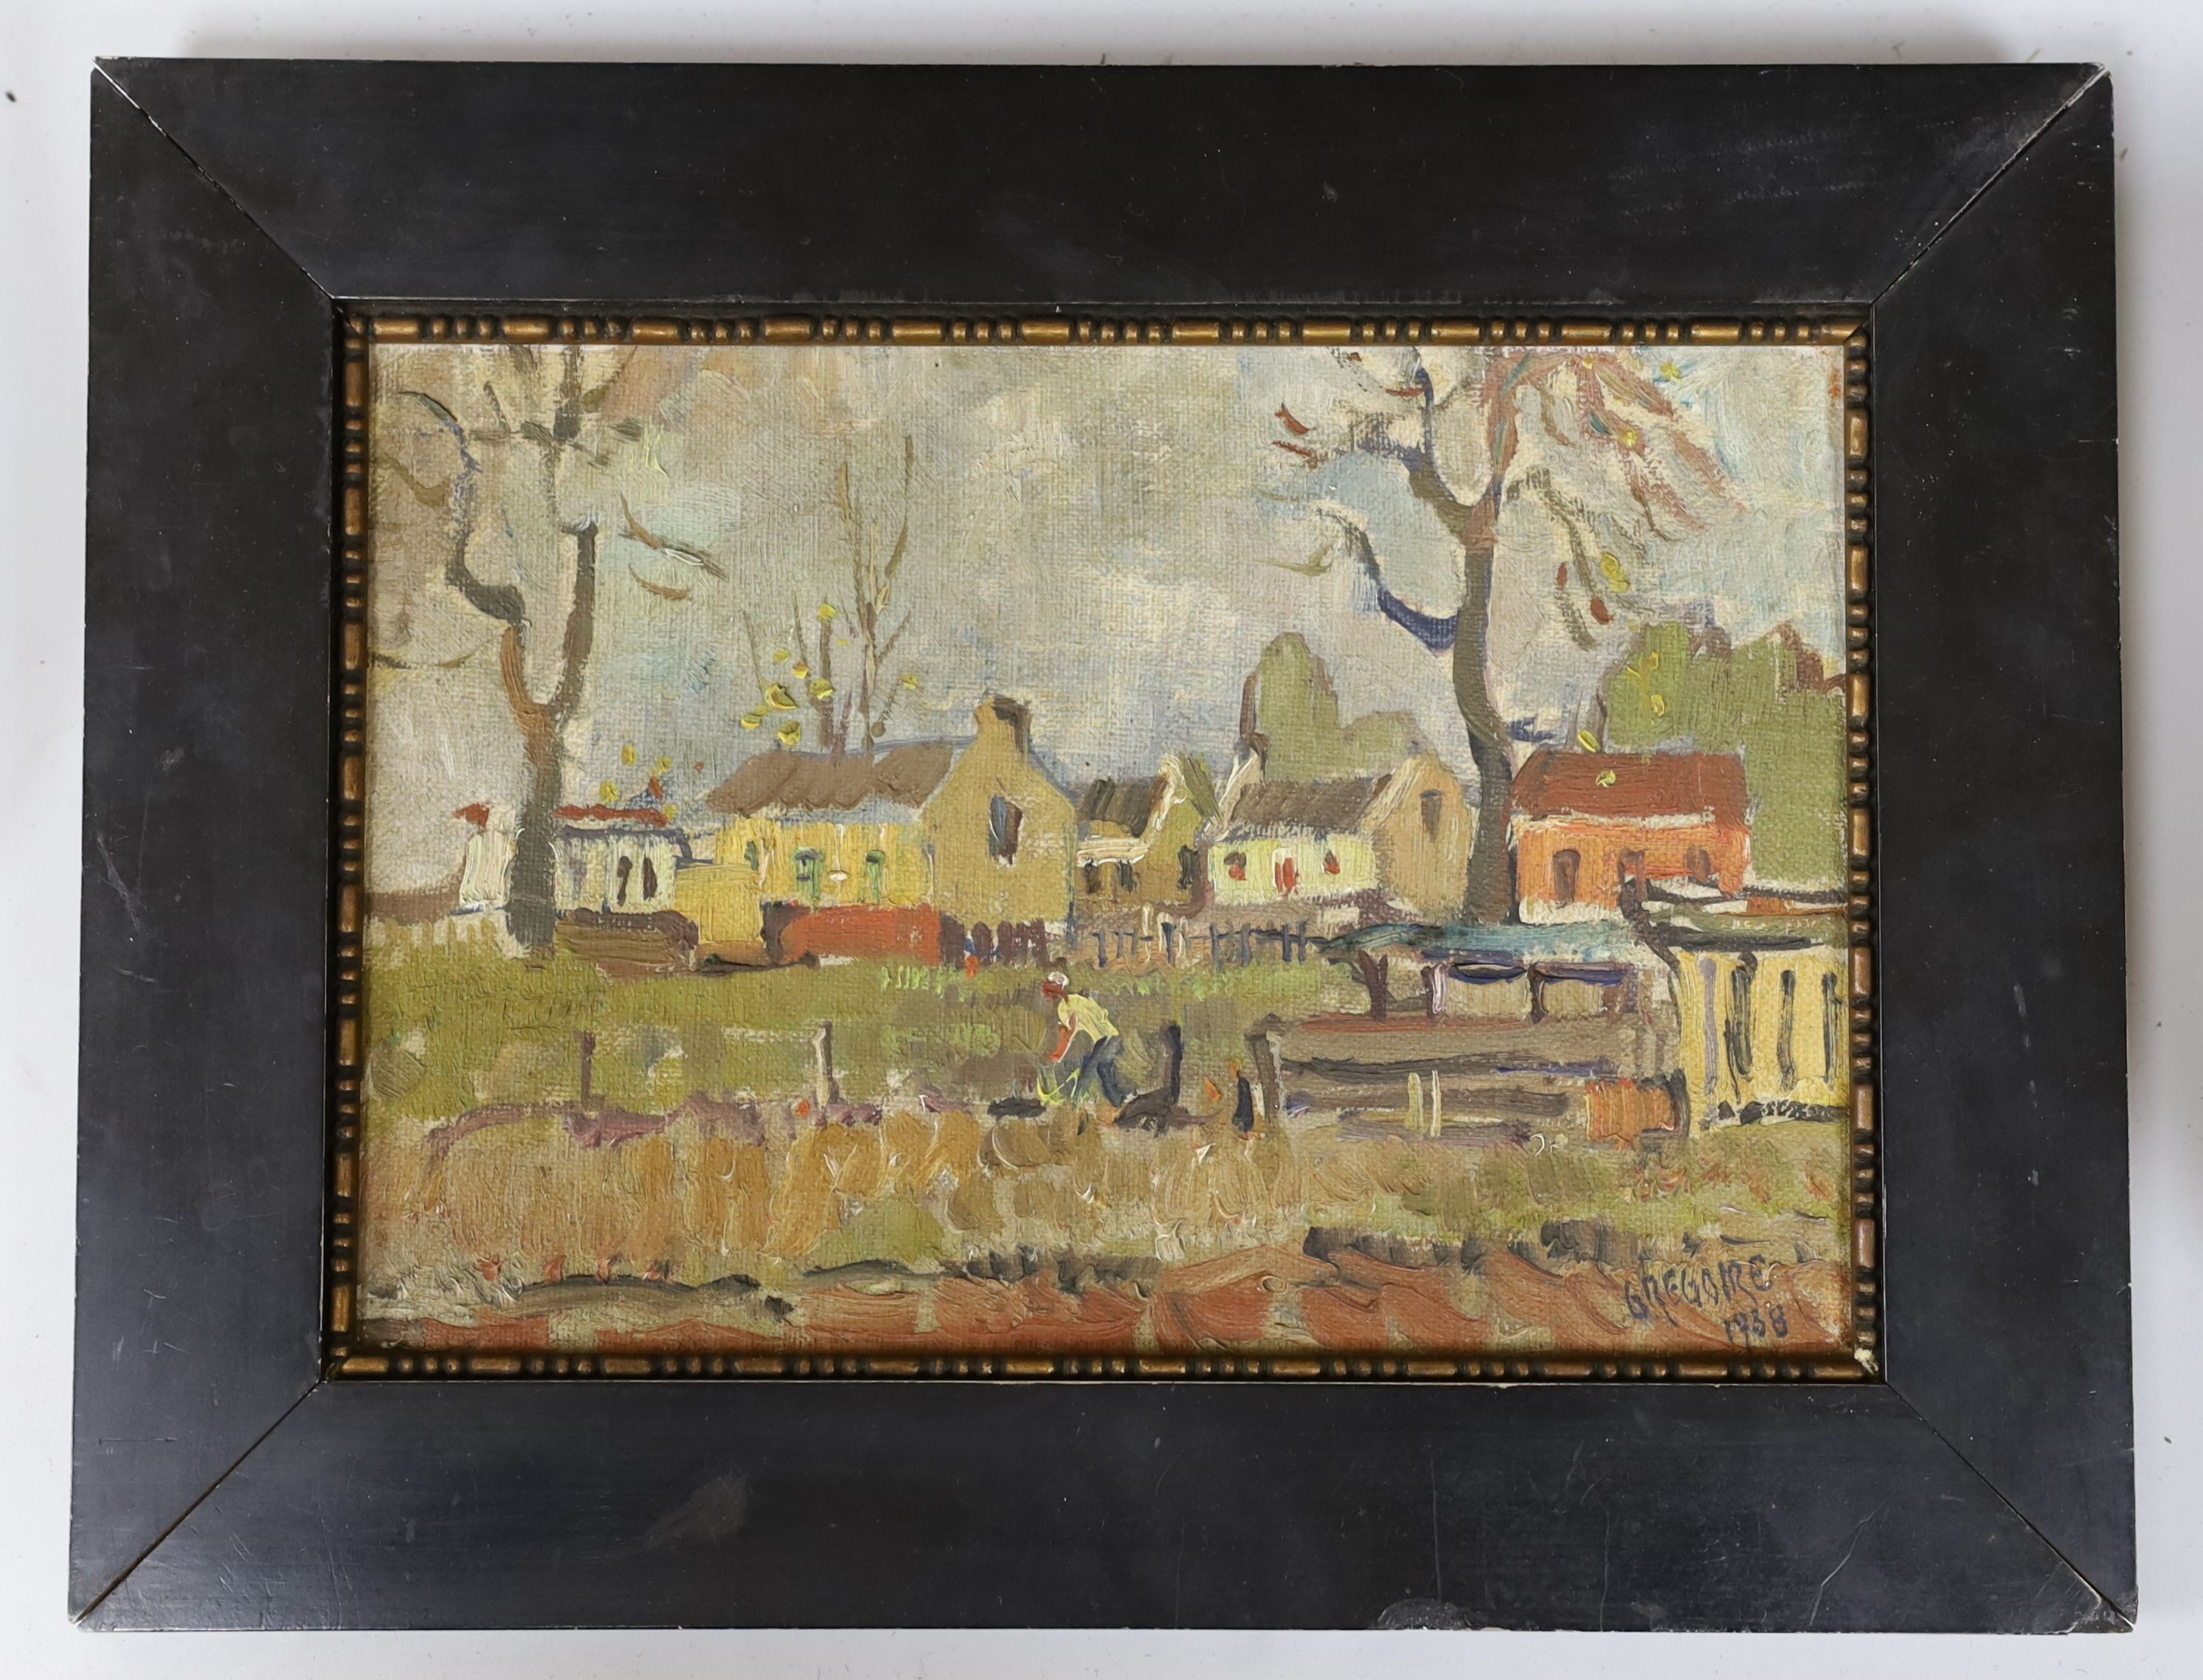 Gregoire Johannes Boonzaier (1909-2005), oil on canvas board, View of a village, signed and dated 1938, 17 x 25cm